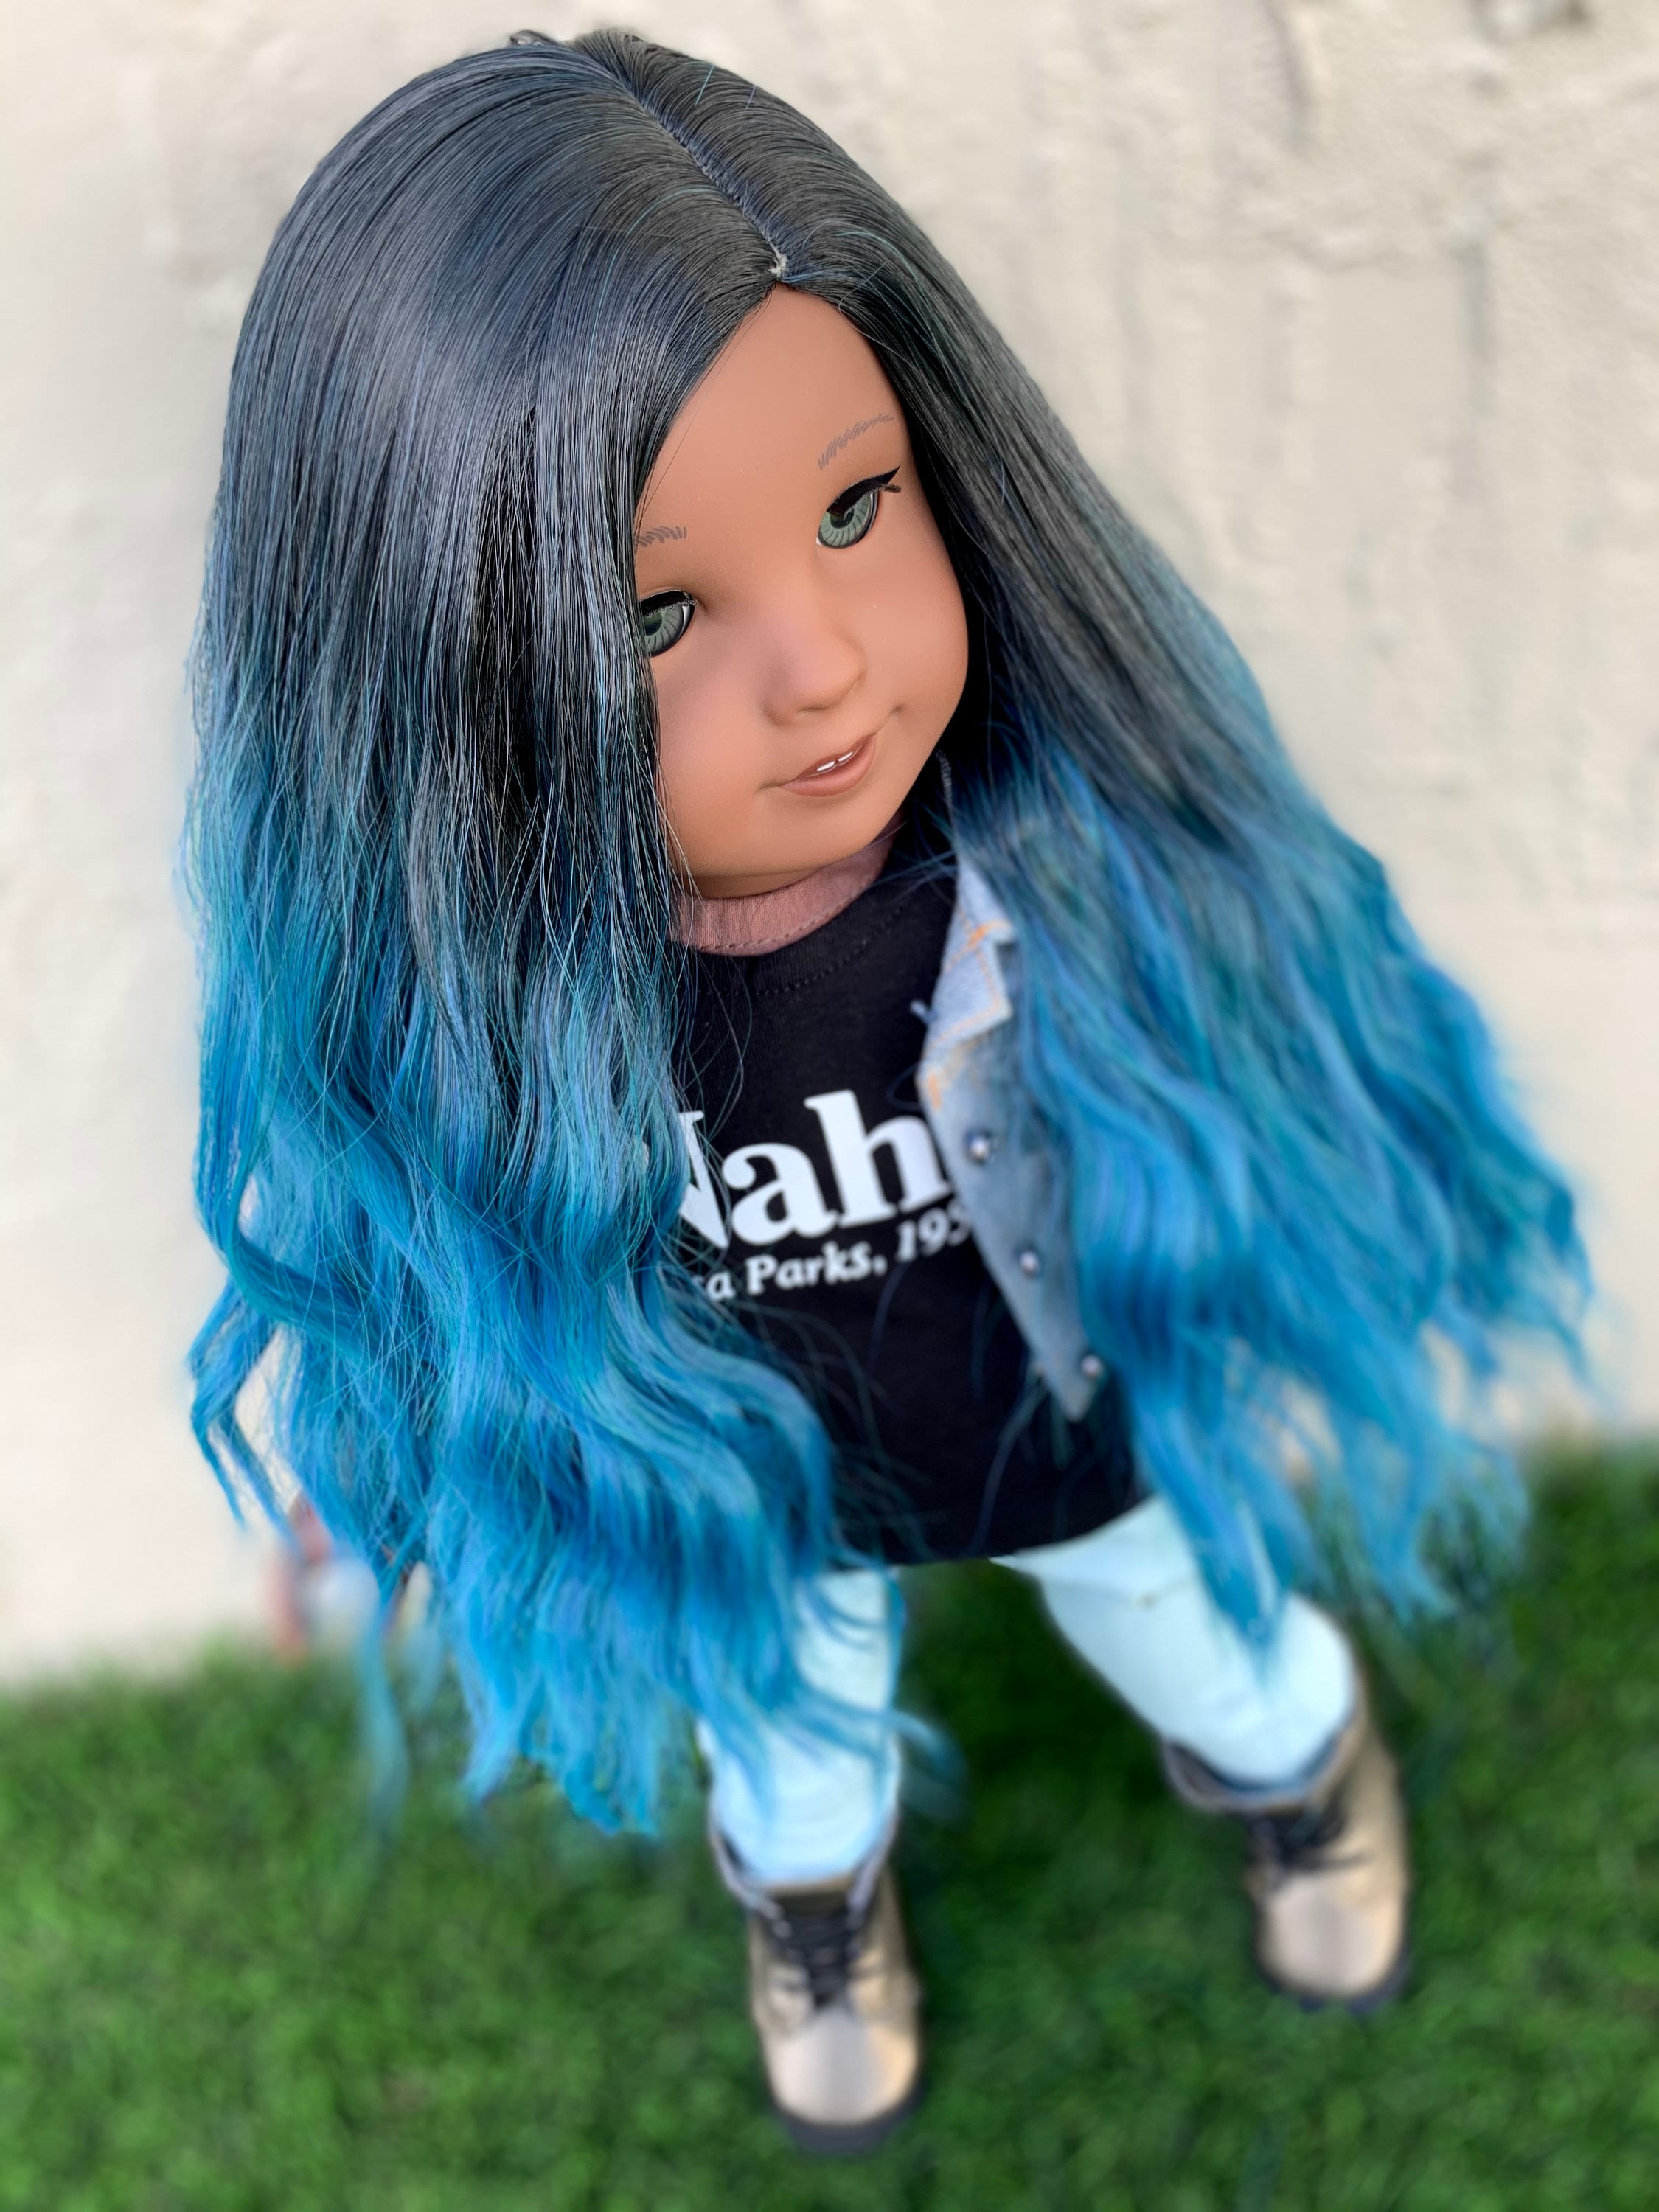 Custom DYED OMBRE Doll Wig for 18" American Girl Doll Heat Safe Tangle Resistant-fits 10-11" head size of all 18" dolls Blue ombre